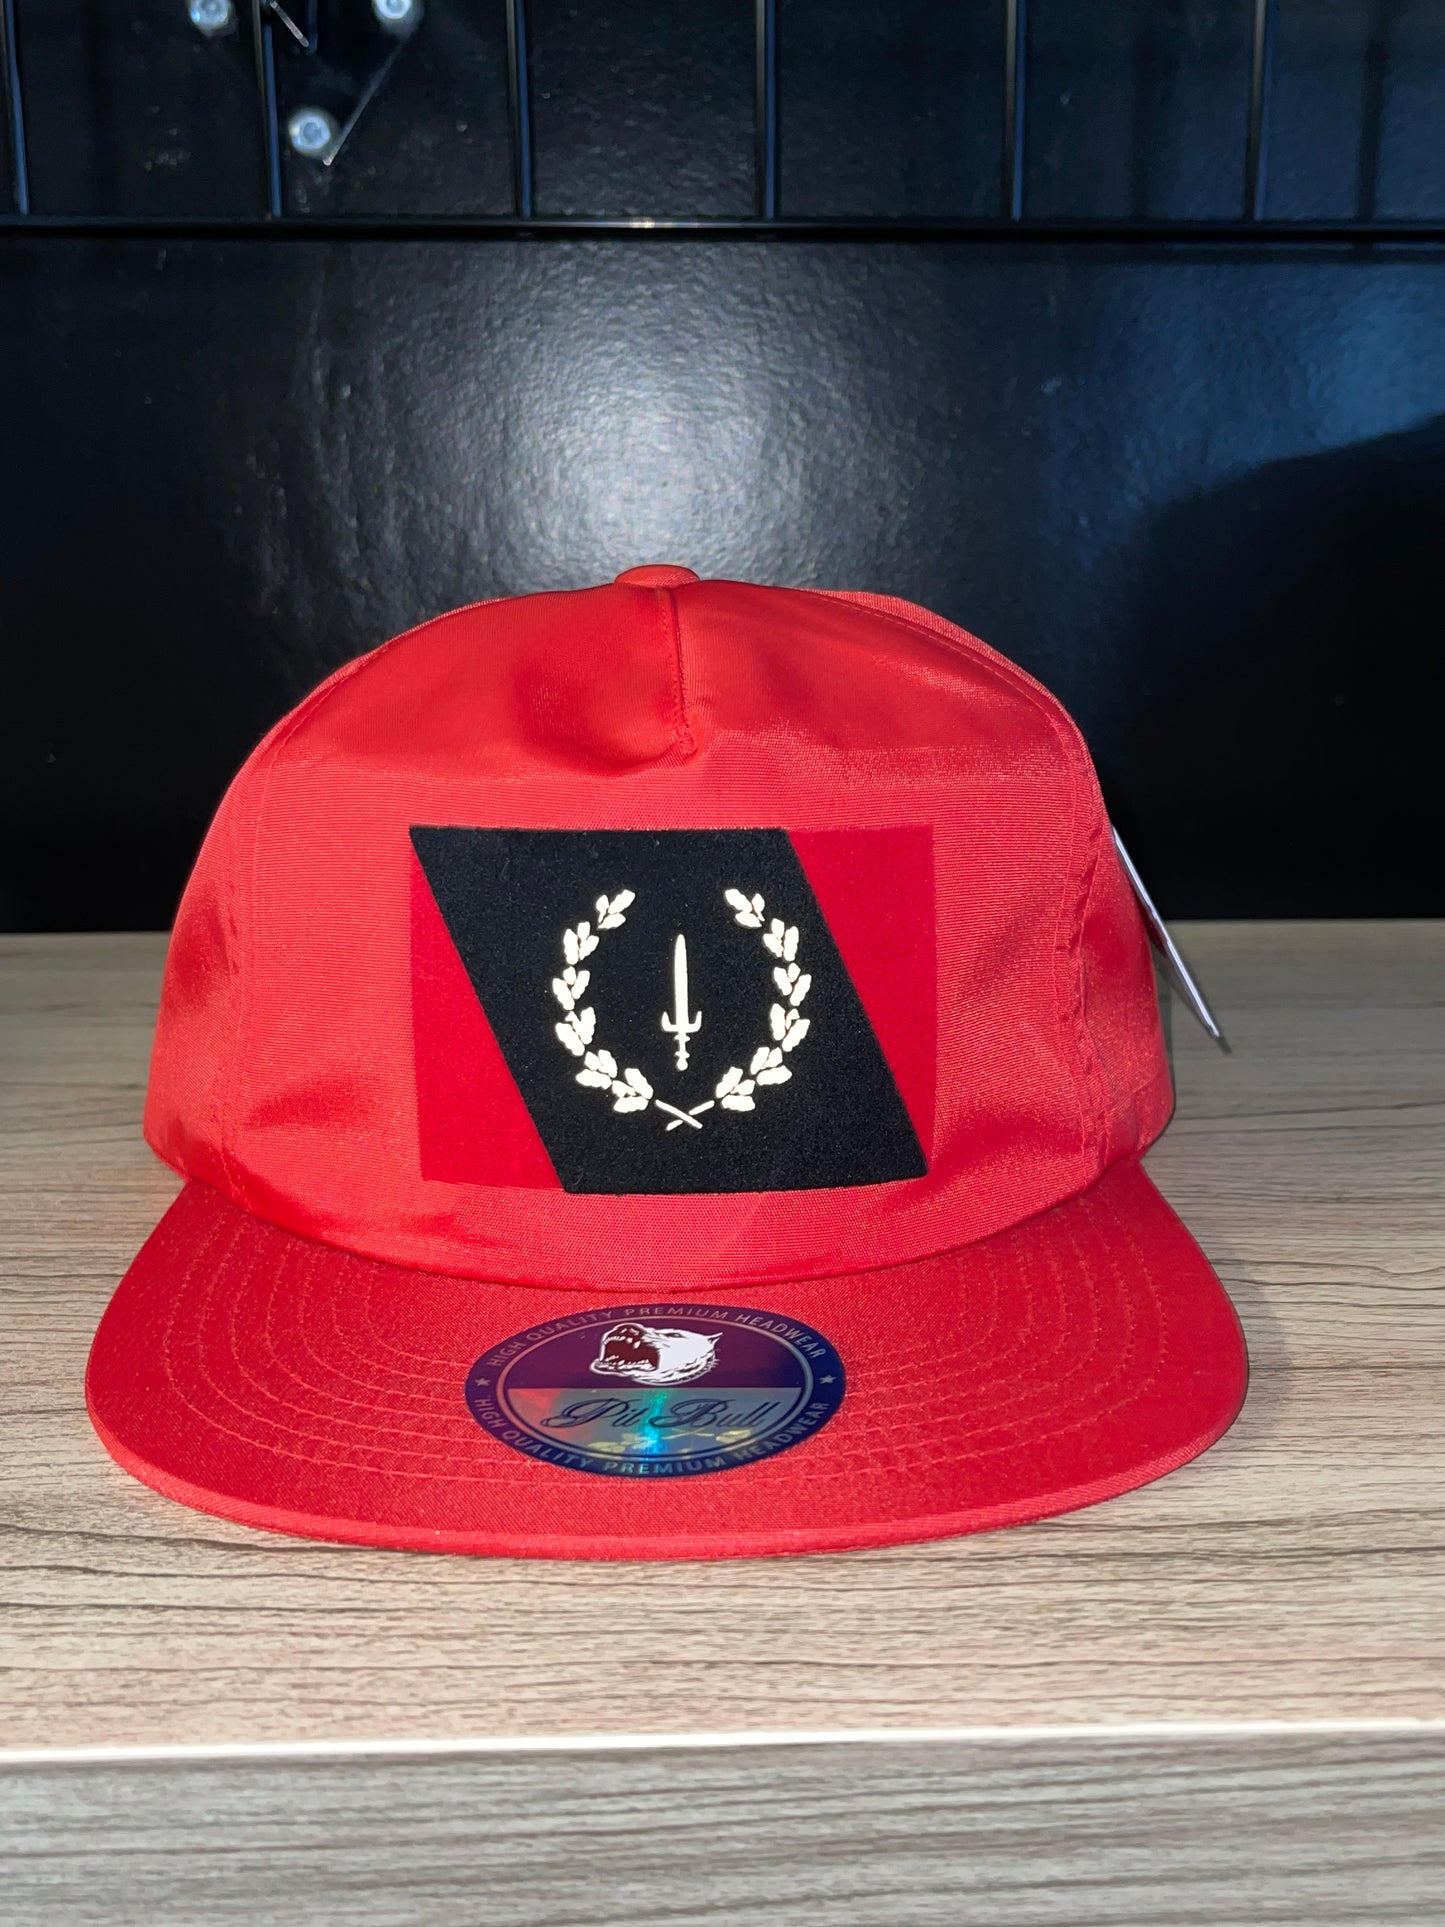 Reflective Black American Heritage Flag 5 panel hat red